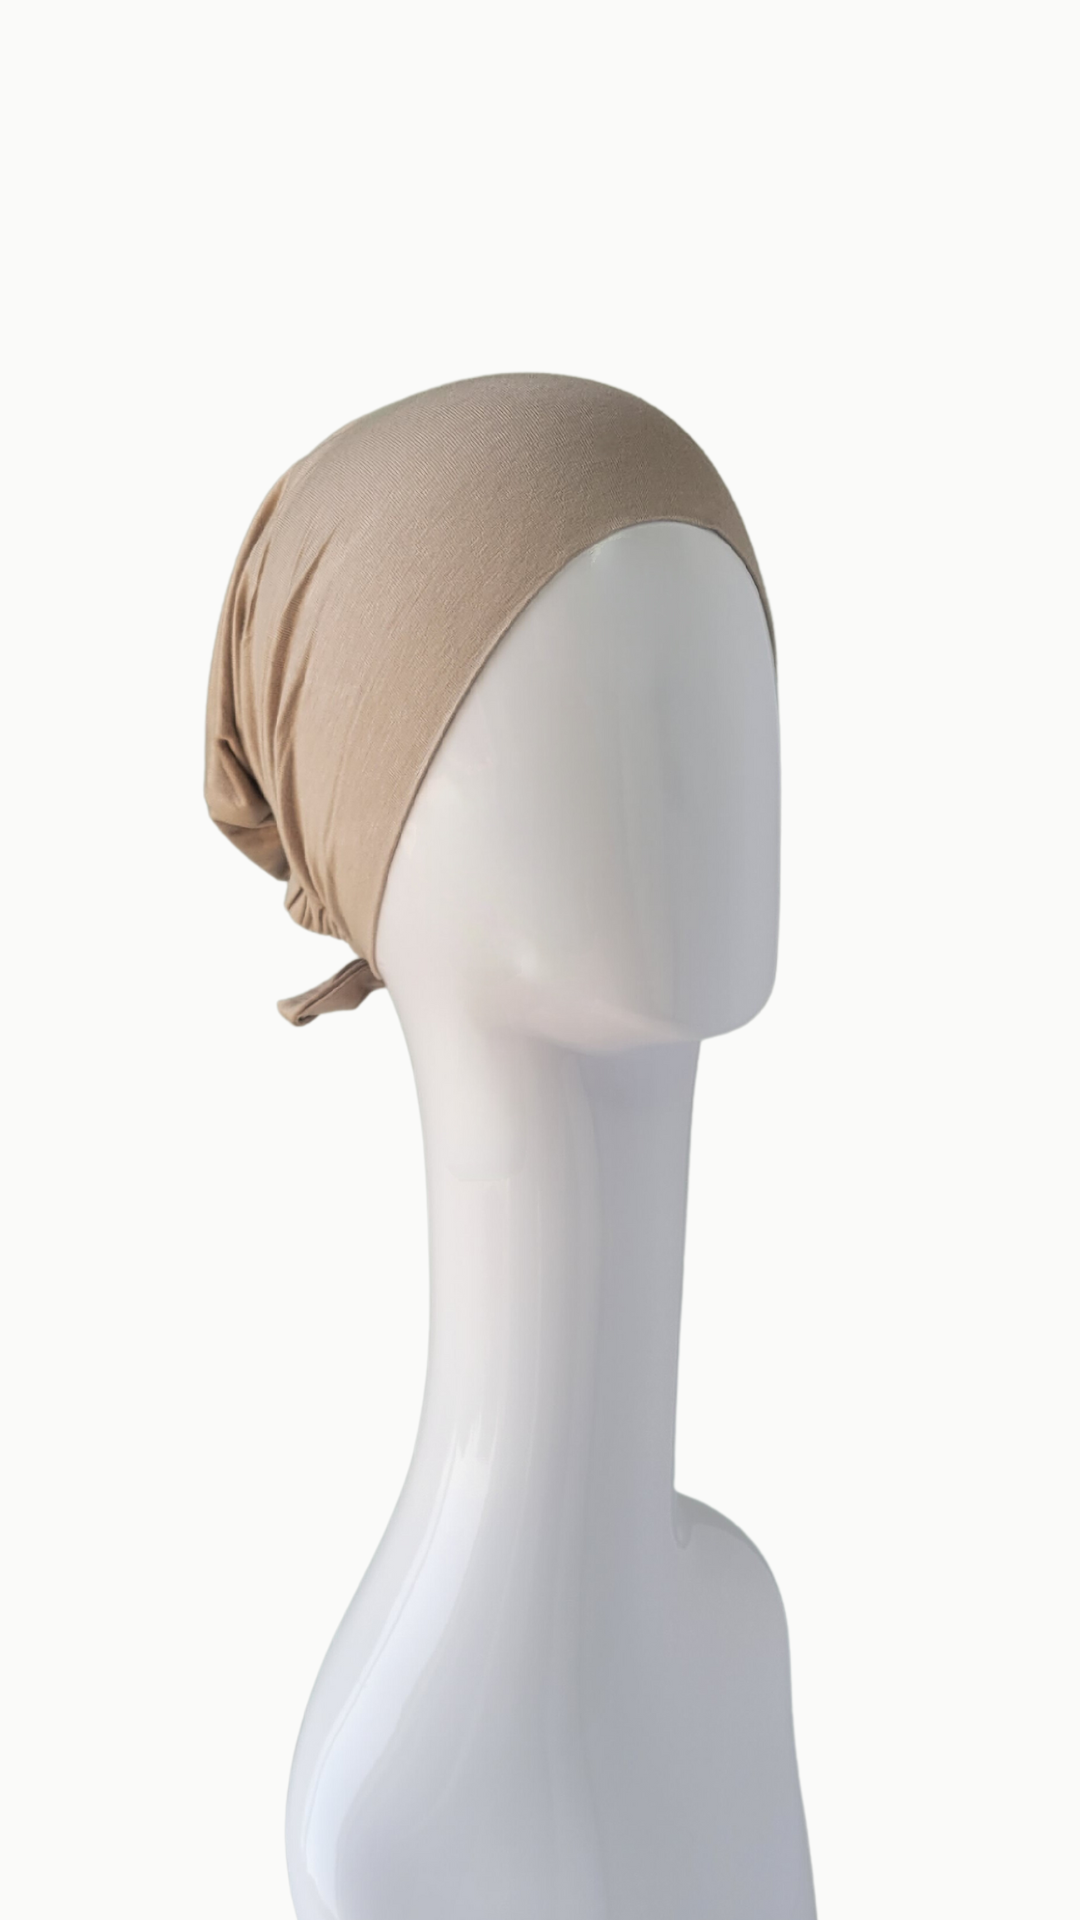 A comfortable and versatile basic tie-back undercap suitable for everyday wear. This undercap features a simple design with adjustable ties at the back, allowing for a customizable fit. 